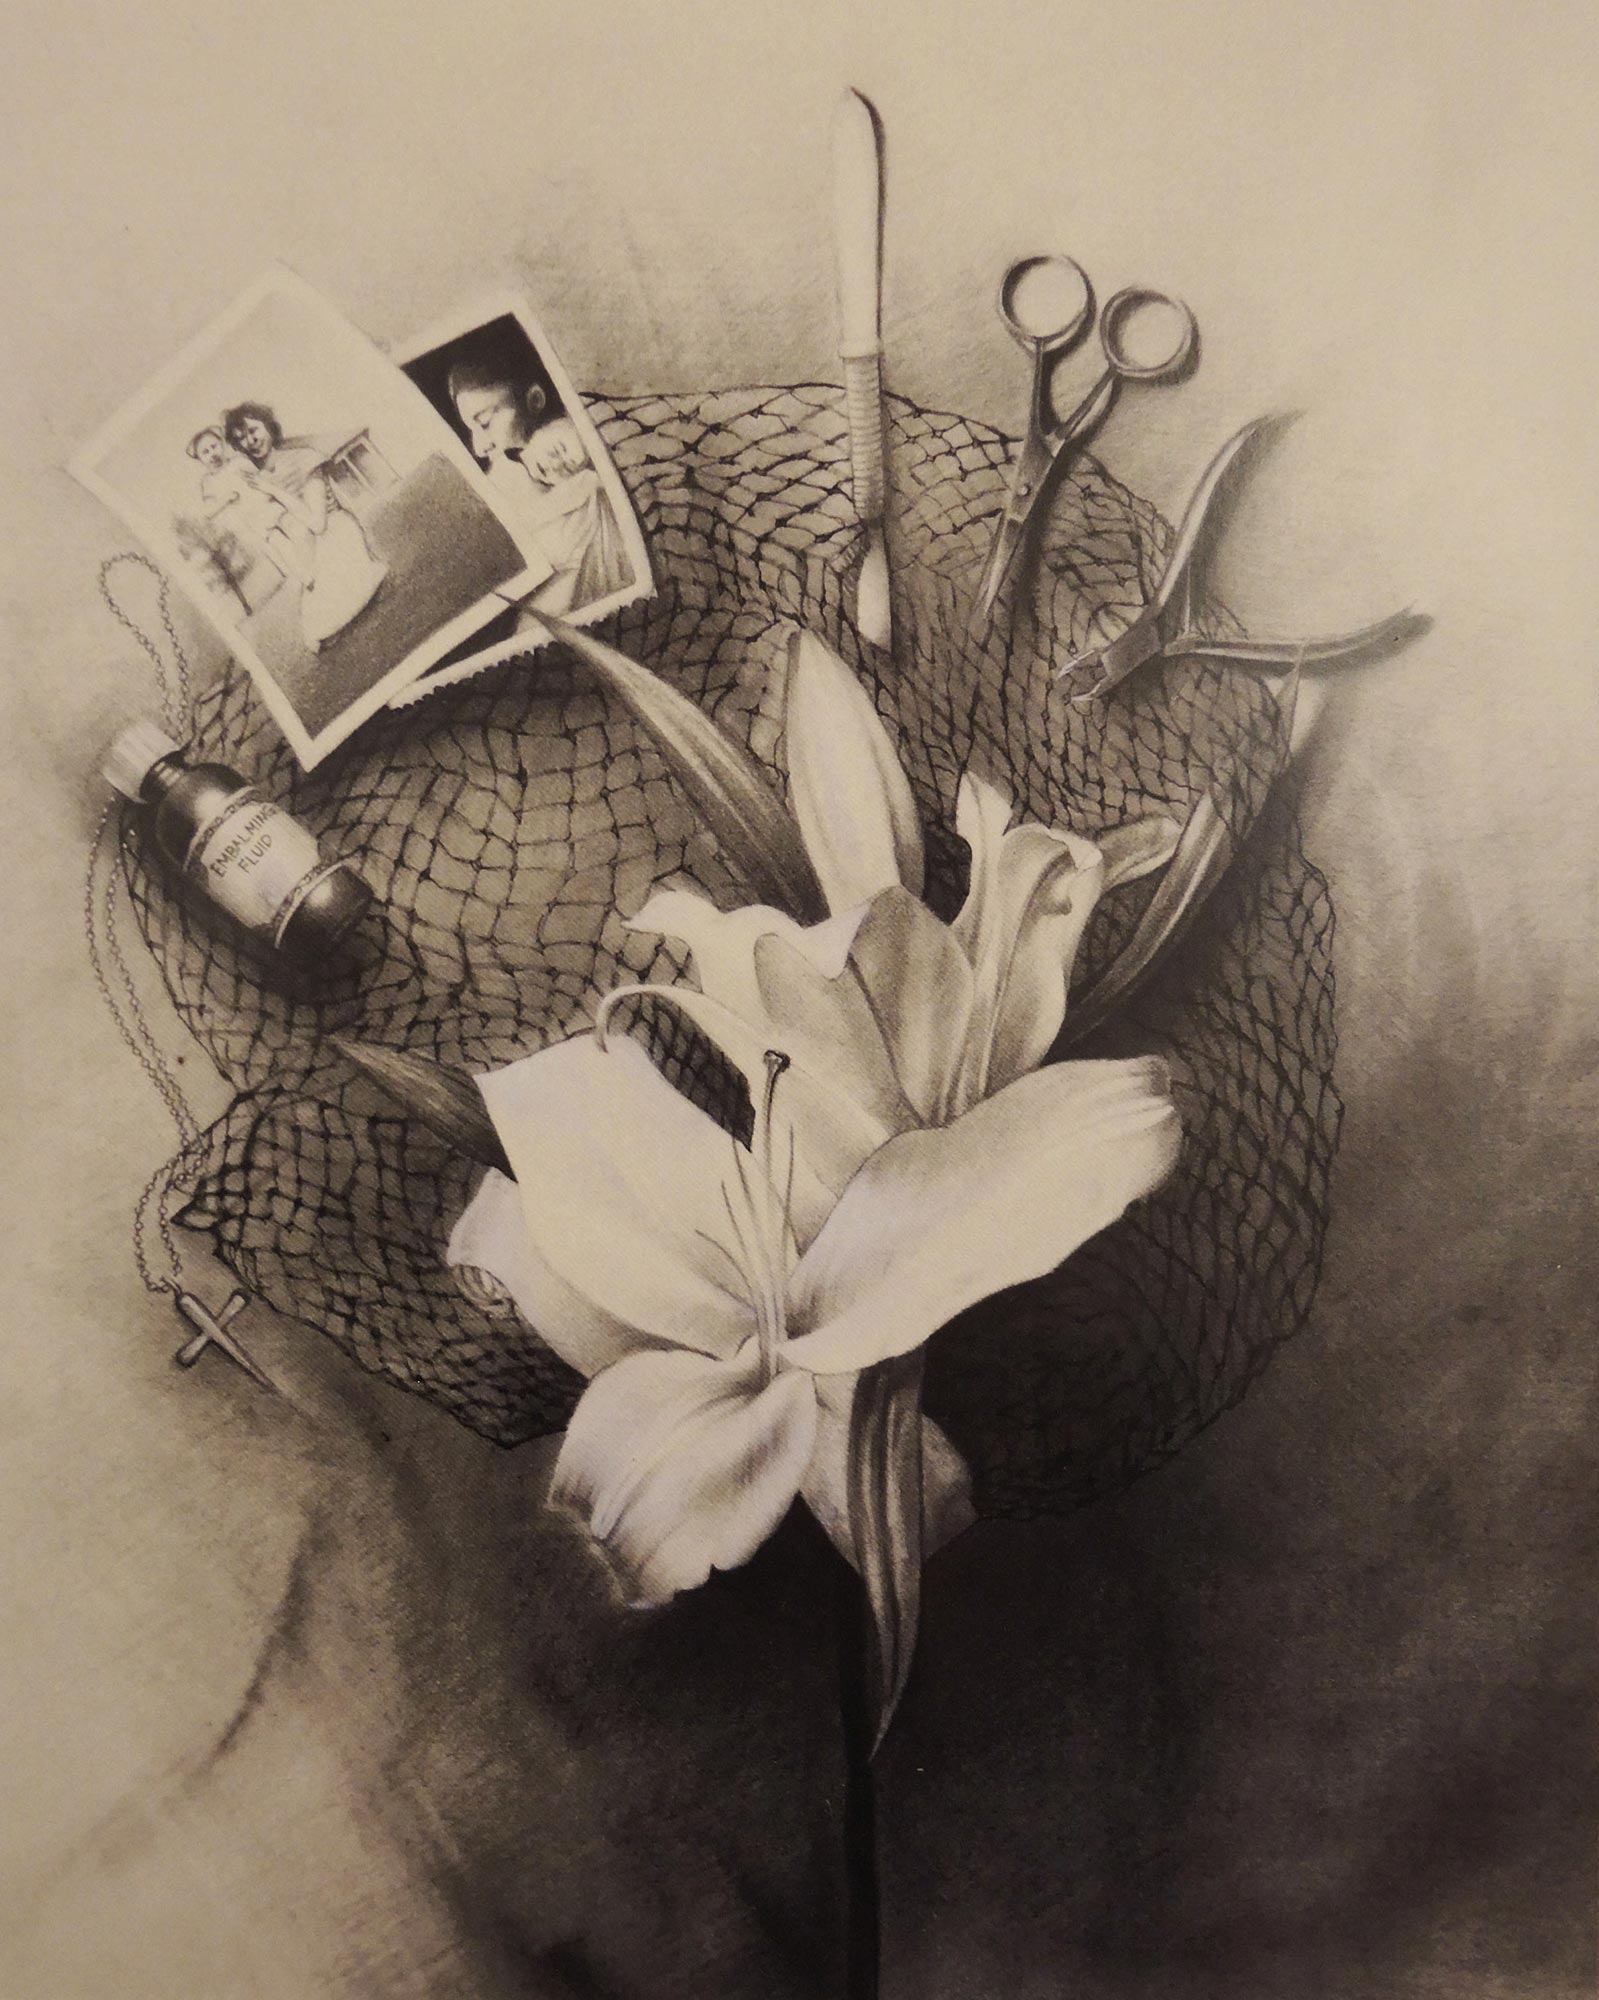 A charcoal drawing of netting with multiple objects